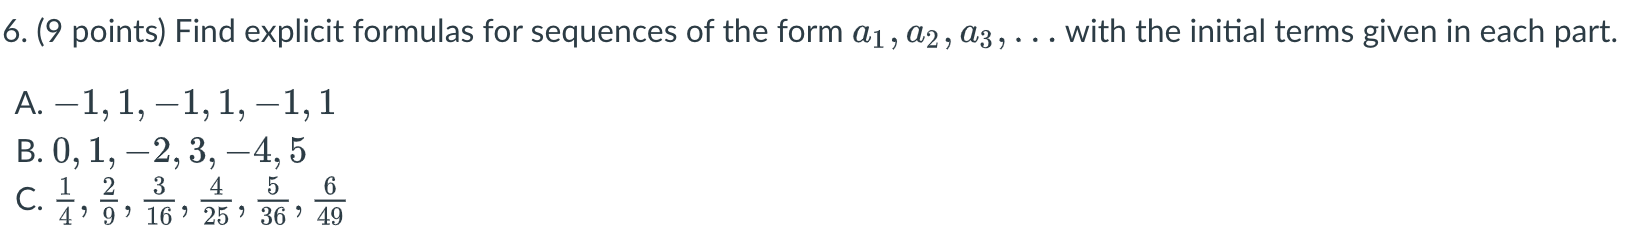 6. (9 points) Find explicit formulas for sequences of the form a1, A2, A3, . A. 1, 1,-1, 1,1,1 B. 0, 1, 2, 3,